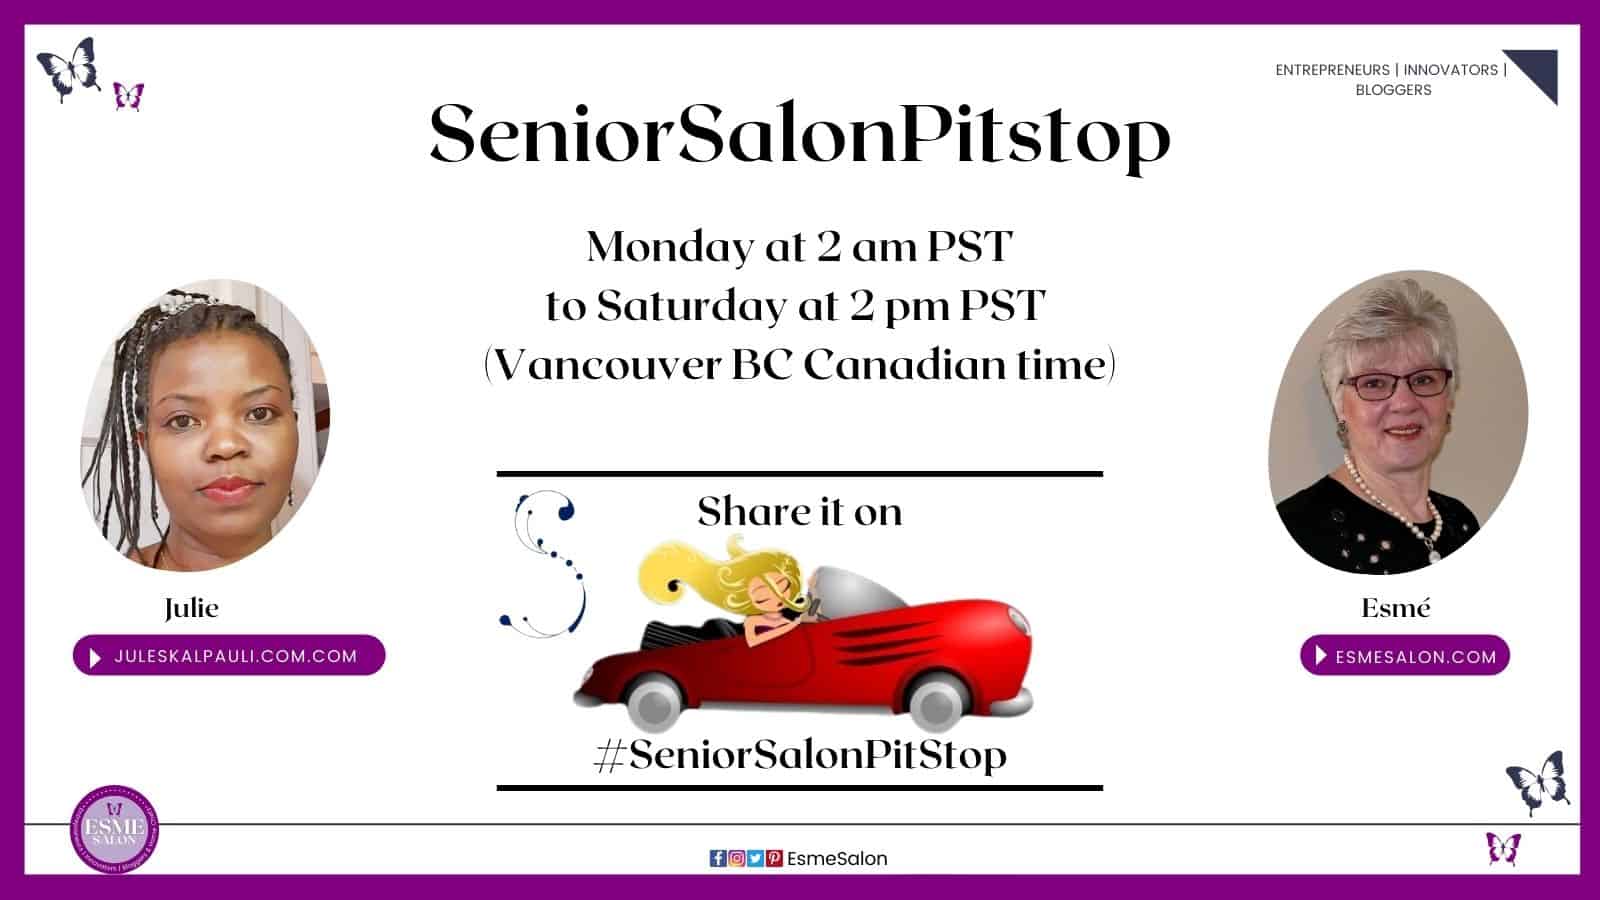 An image of the SeniorSalonPitstop weekly post